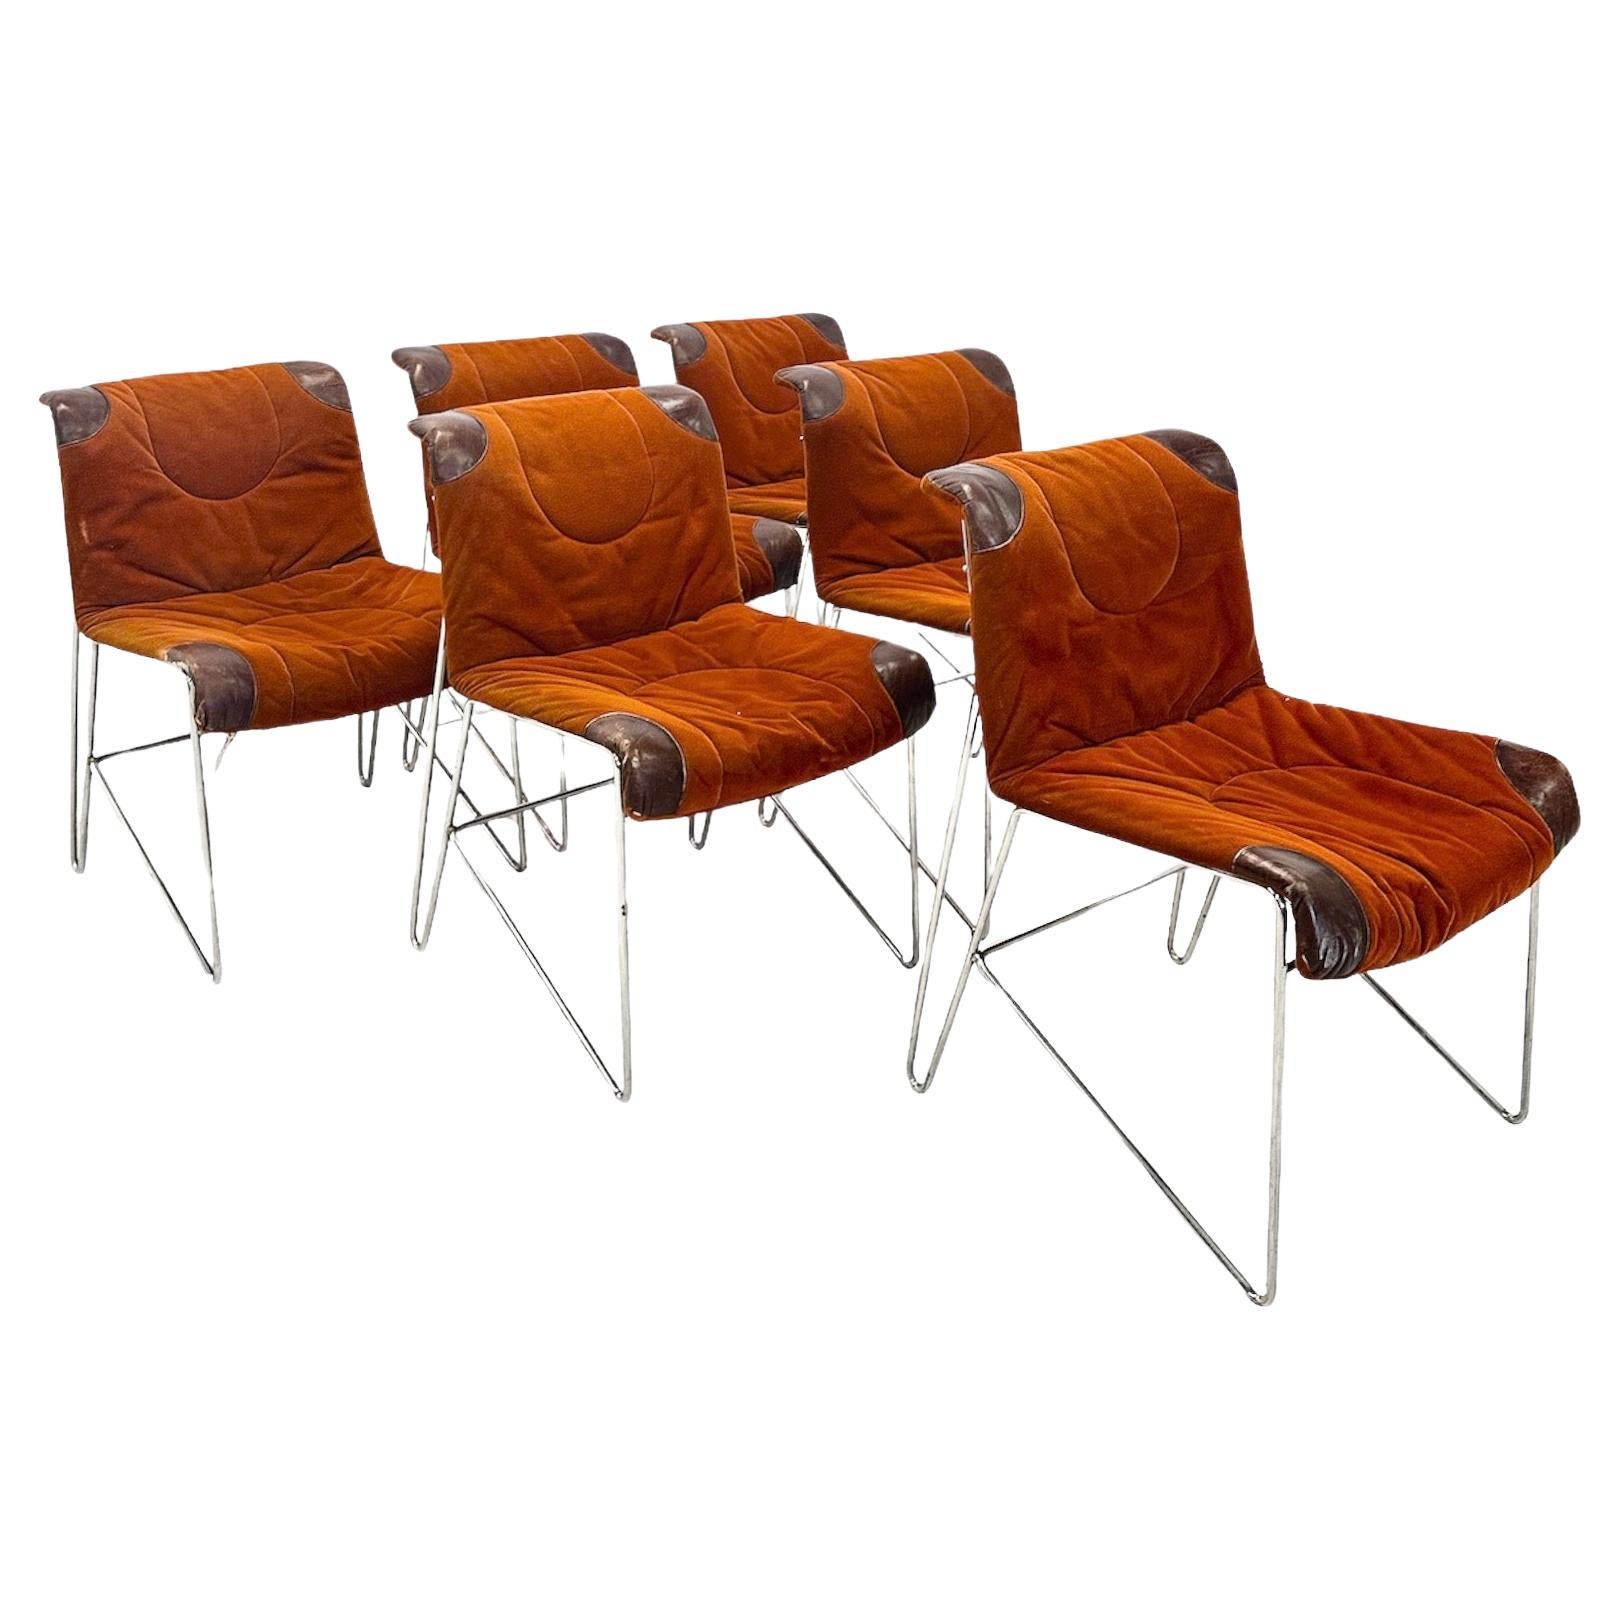 Set of 6 Mid-Century Modern Italian Orange Chairs by Guido Faleschini 1970s For Sale